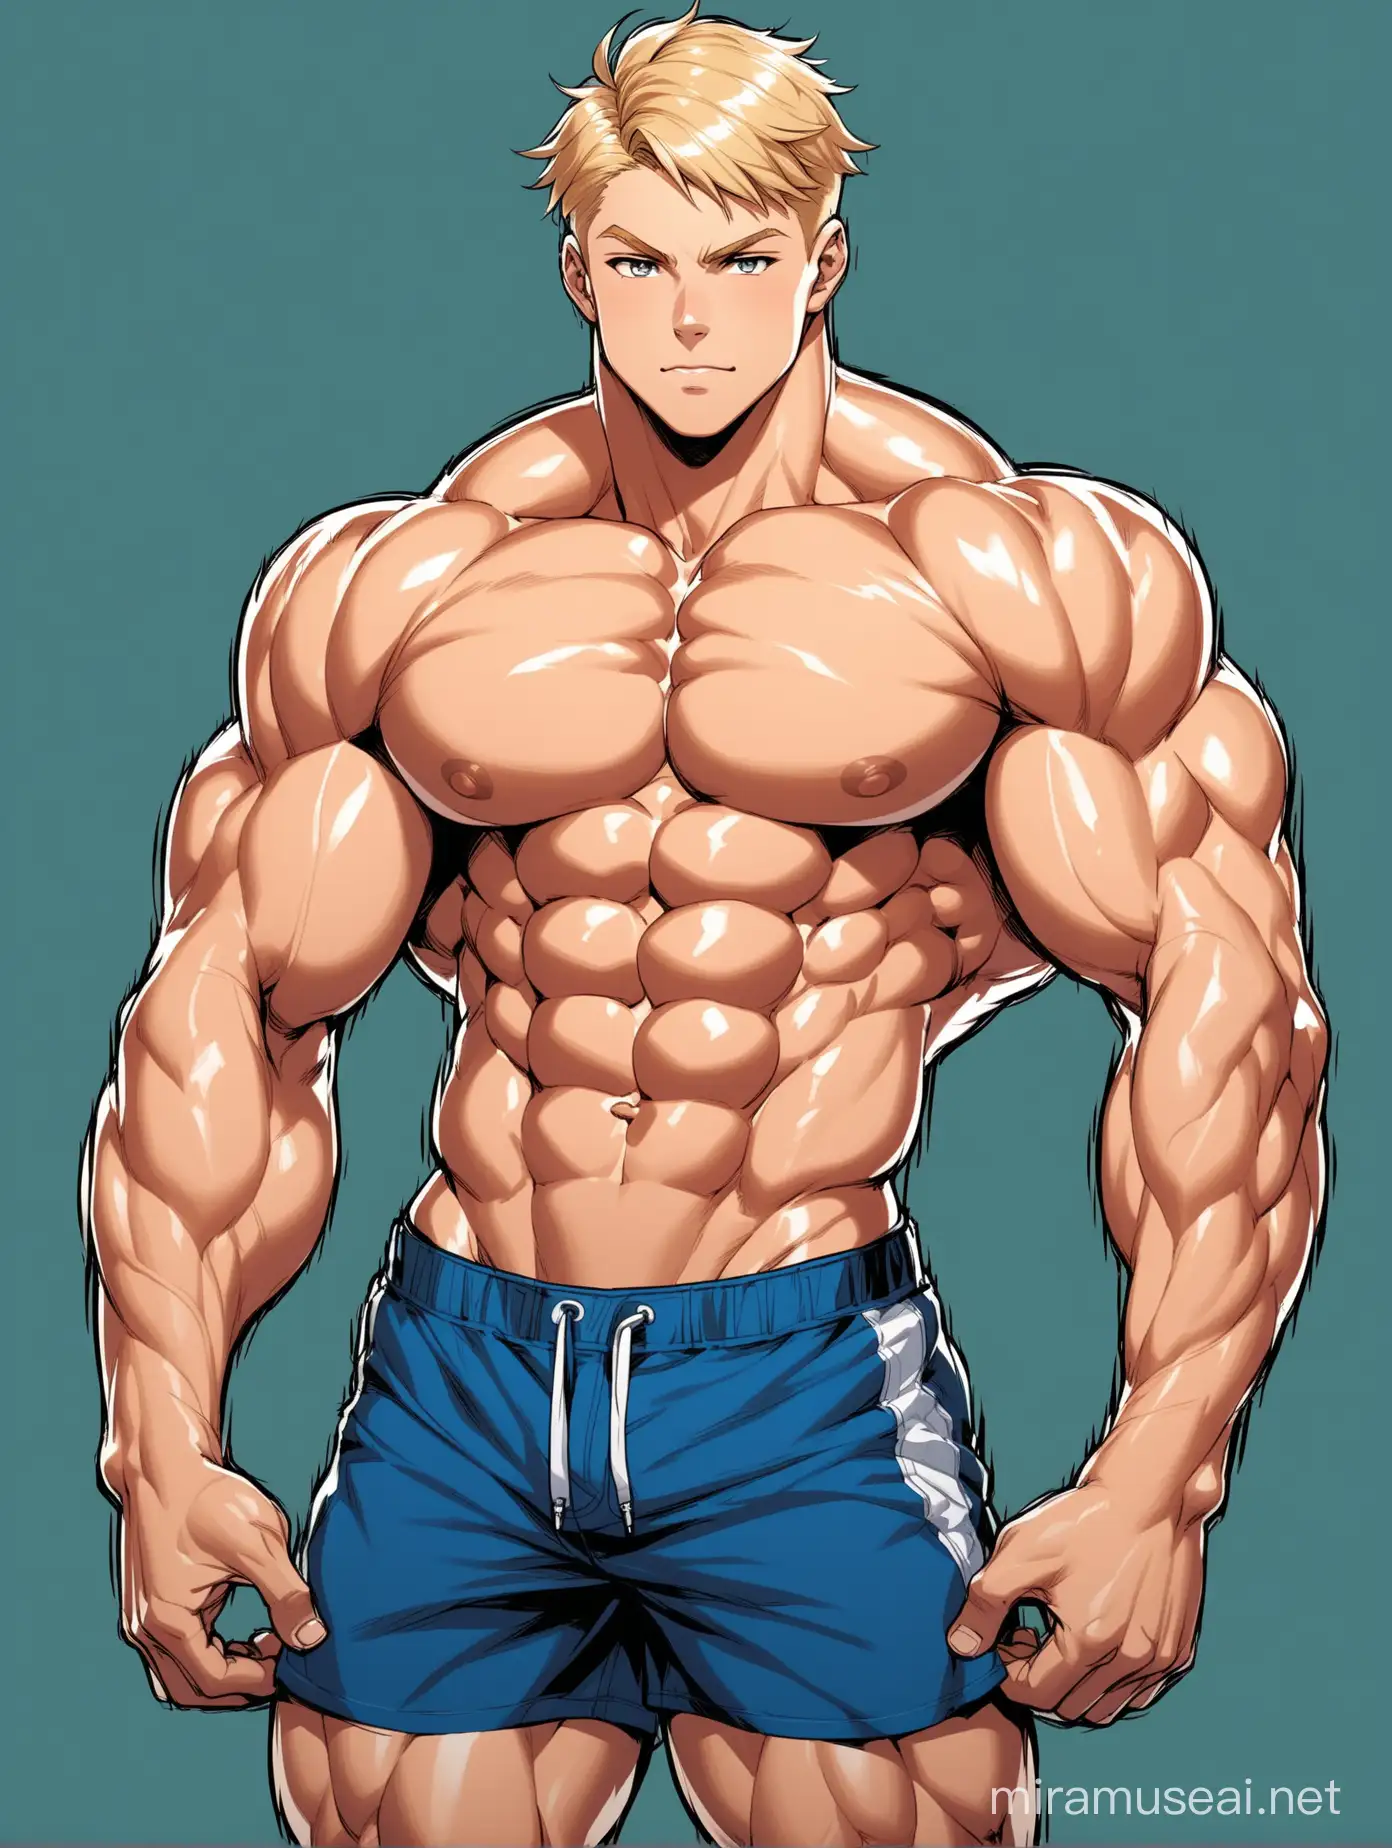 Full color drawing of an extremely muscular teenage male with short blond hair, a very beautiful, delicate face, wide shoulders, huge biceps, hard six-pack abs, and very strong and powerful legs, wearing shorts or trunks